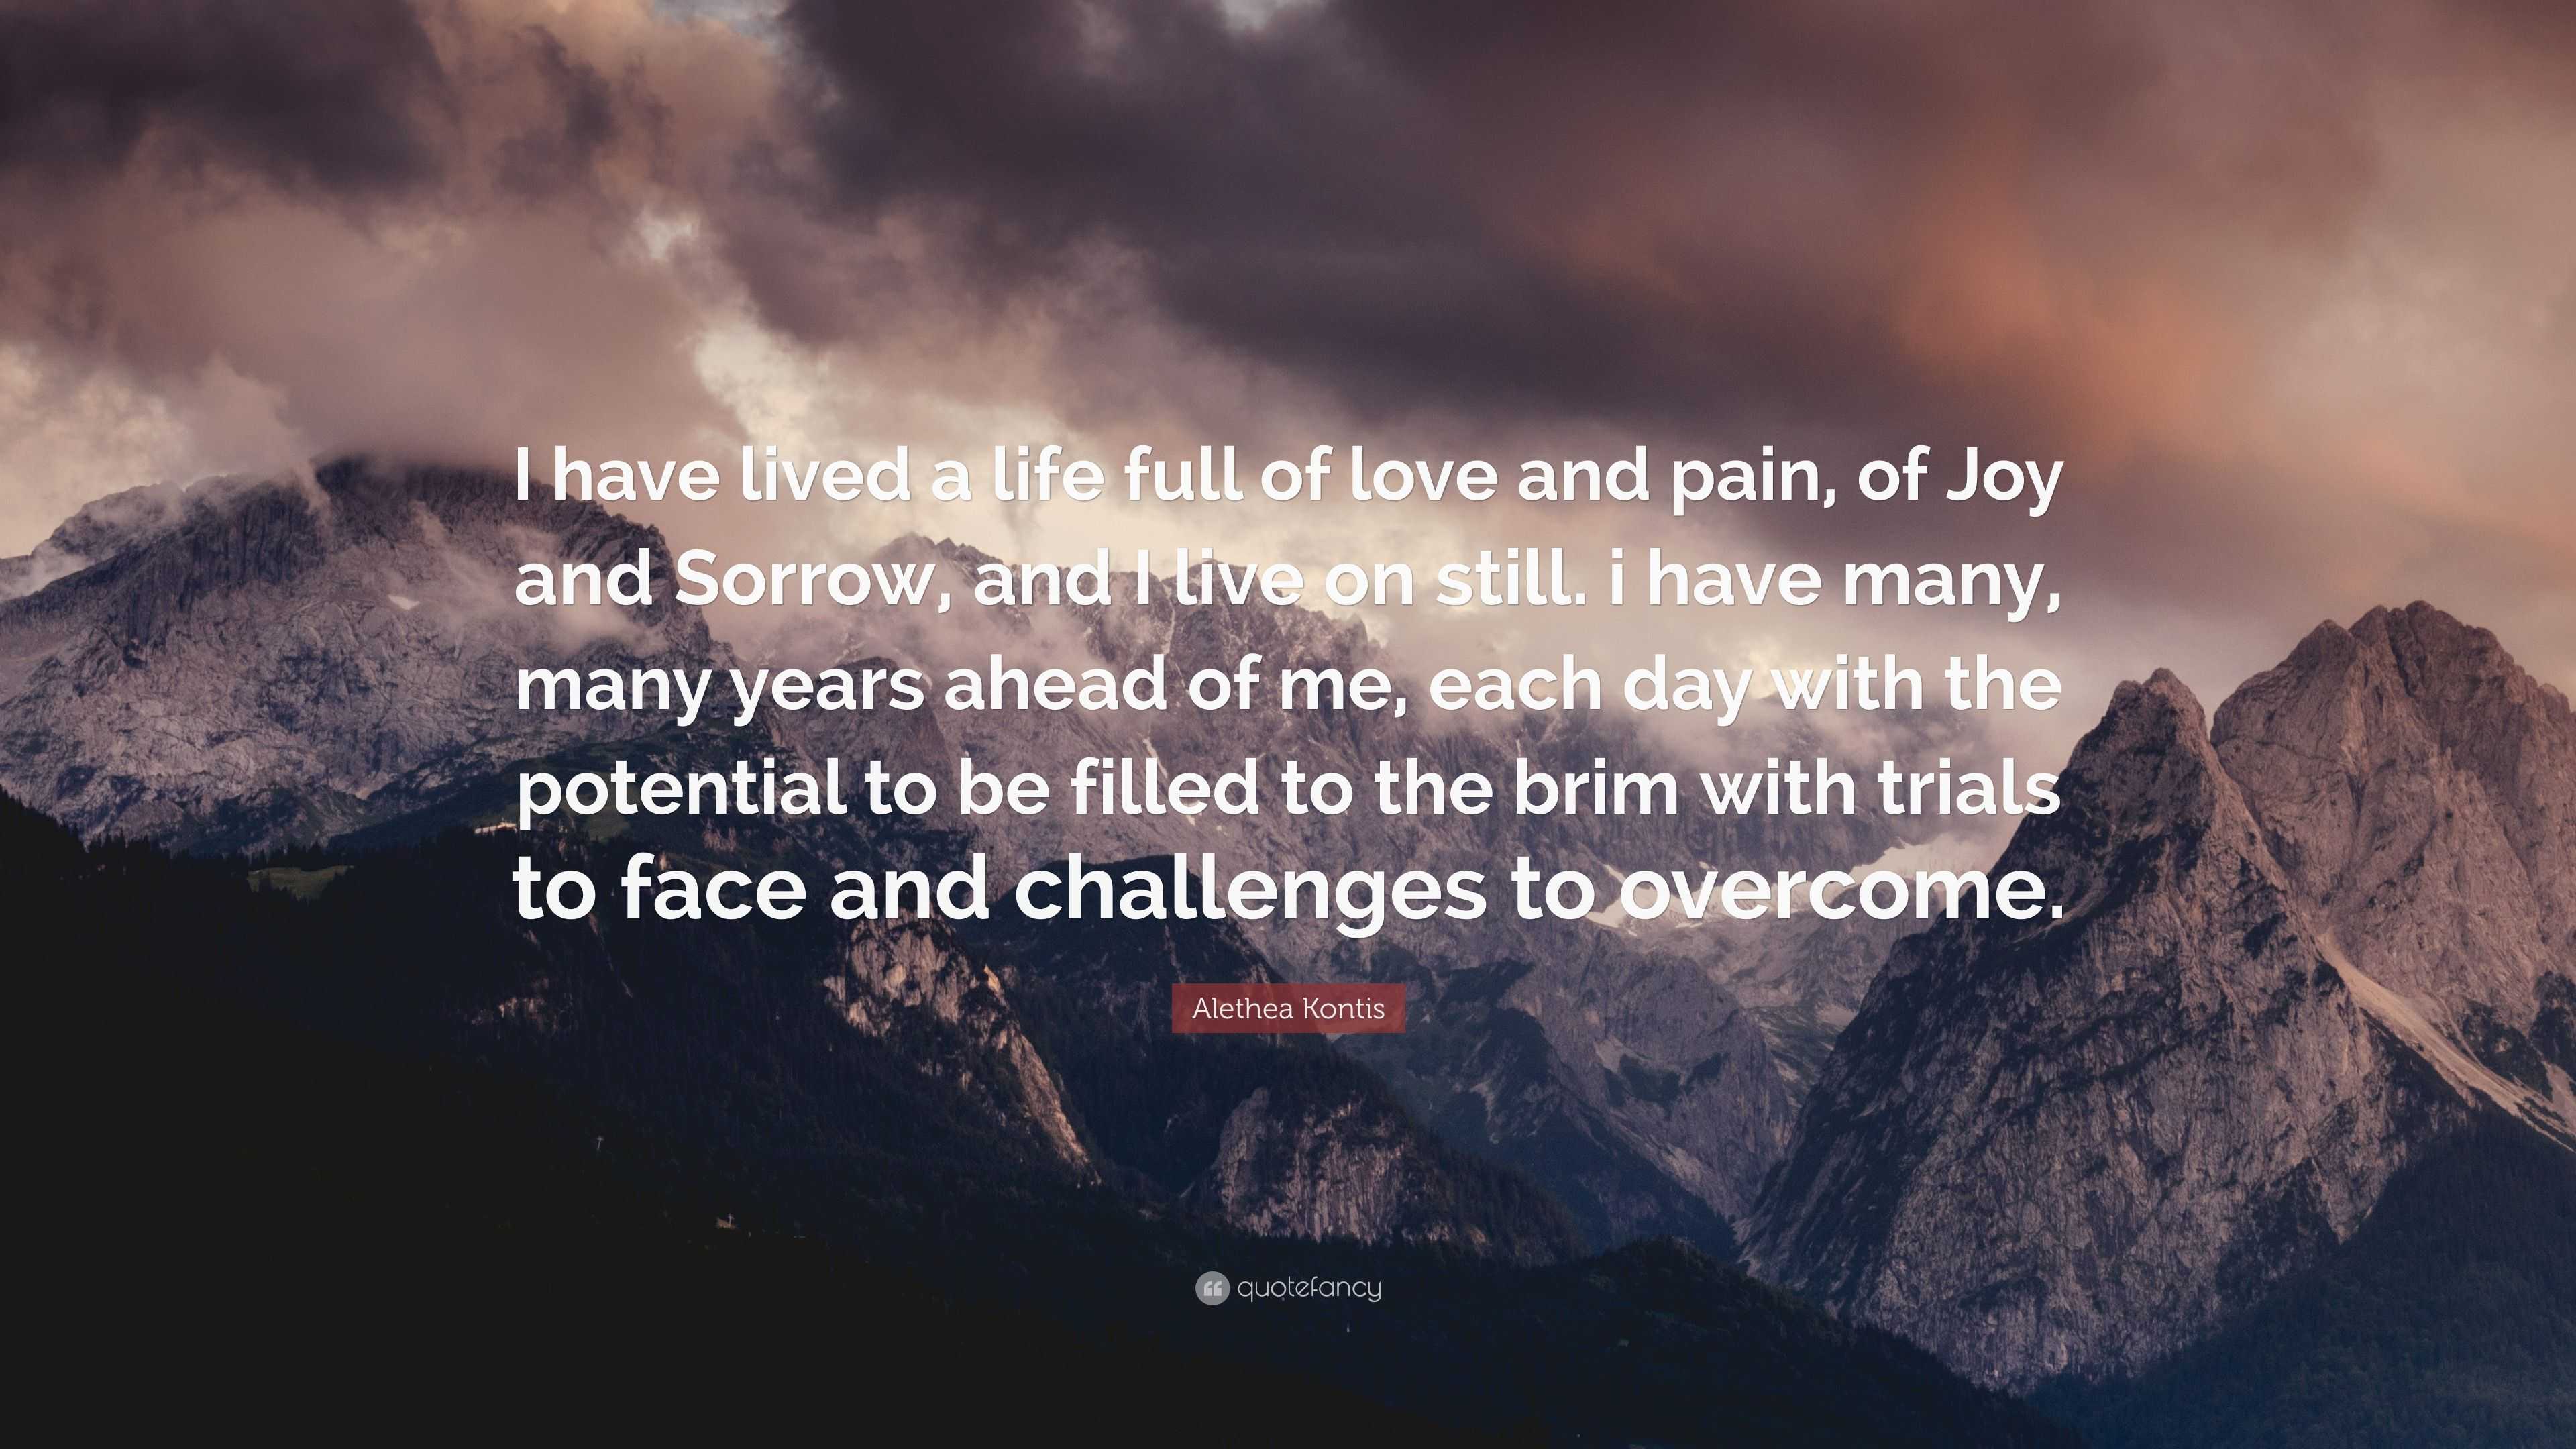 Alethea Kontis Quote “I have lived a life full of love and pain